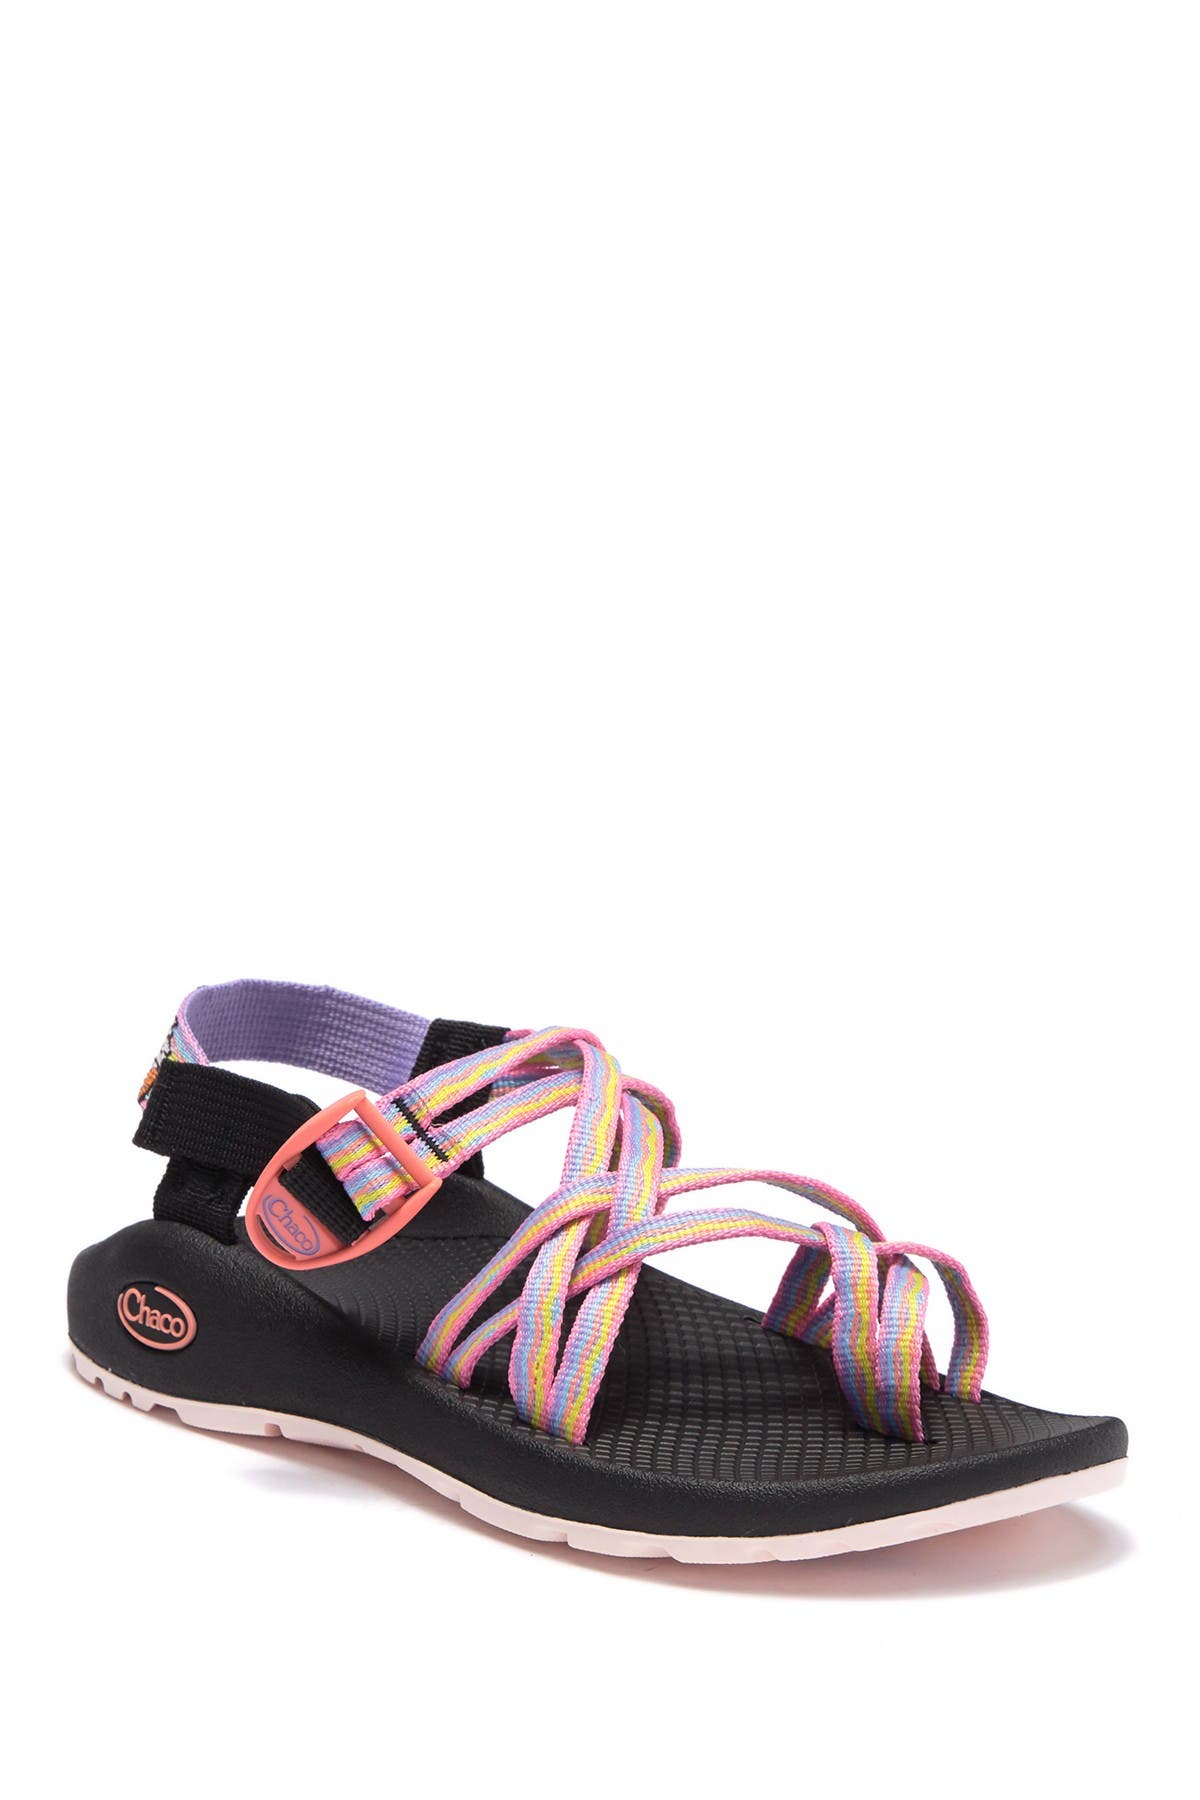 Chaco | ZX2 Classic Ice Cream Pattern 